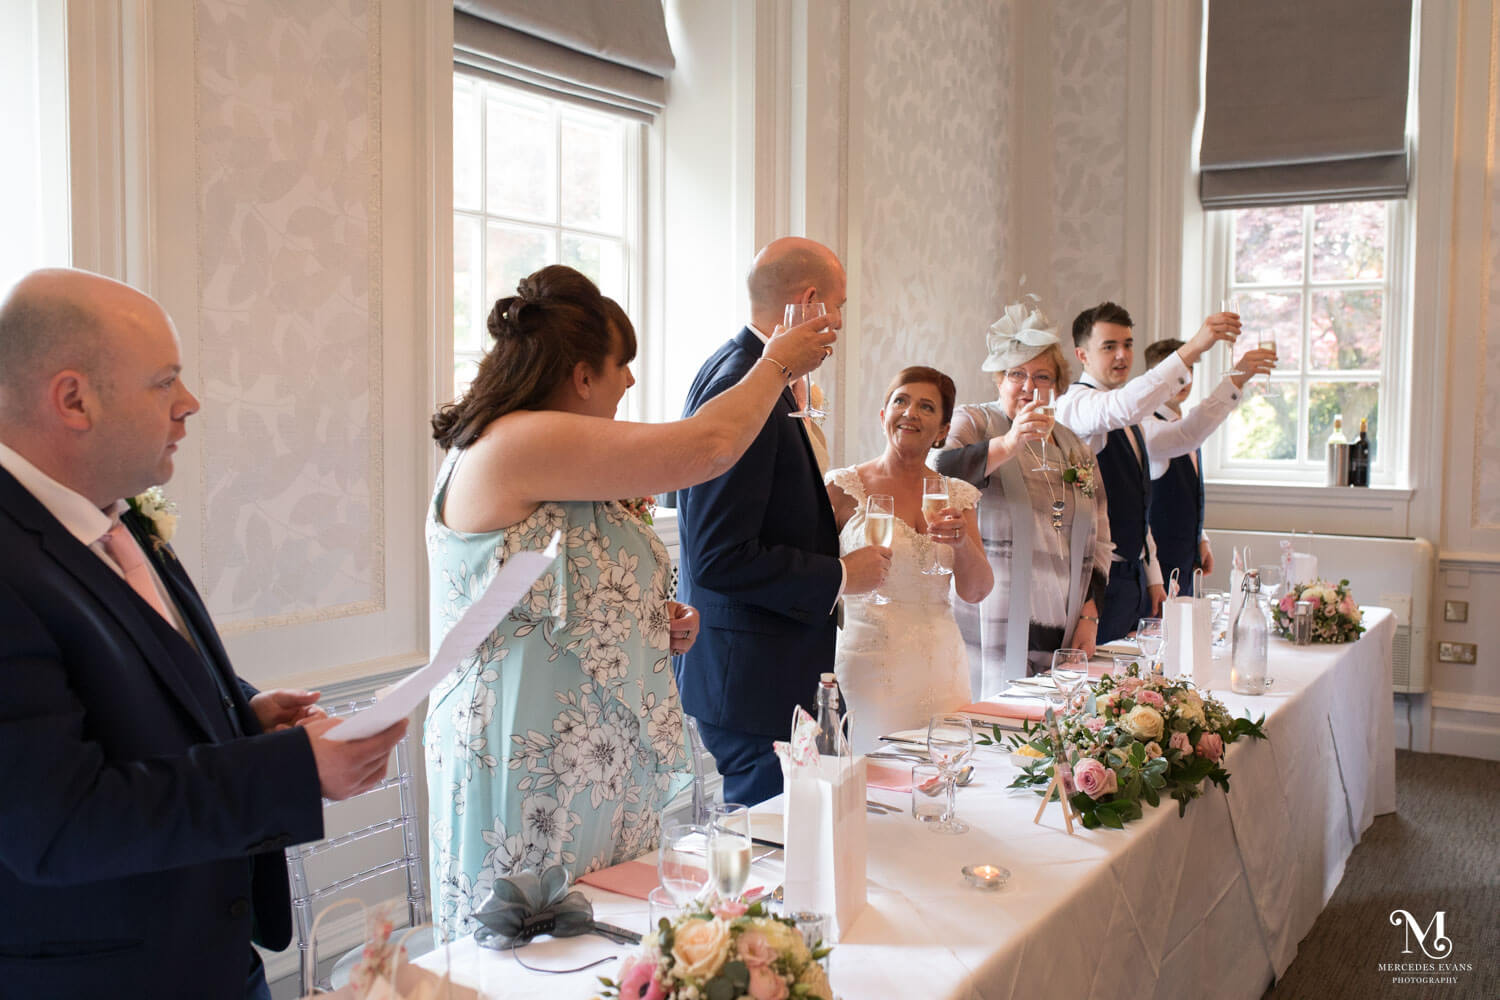 the top table toasts the happy couple with champagne